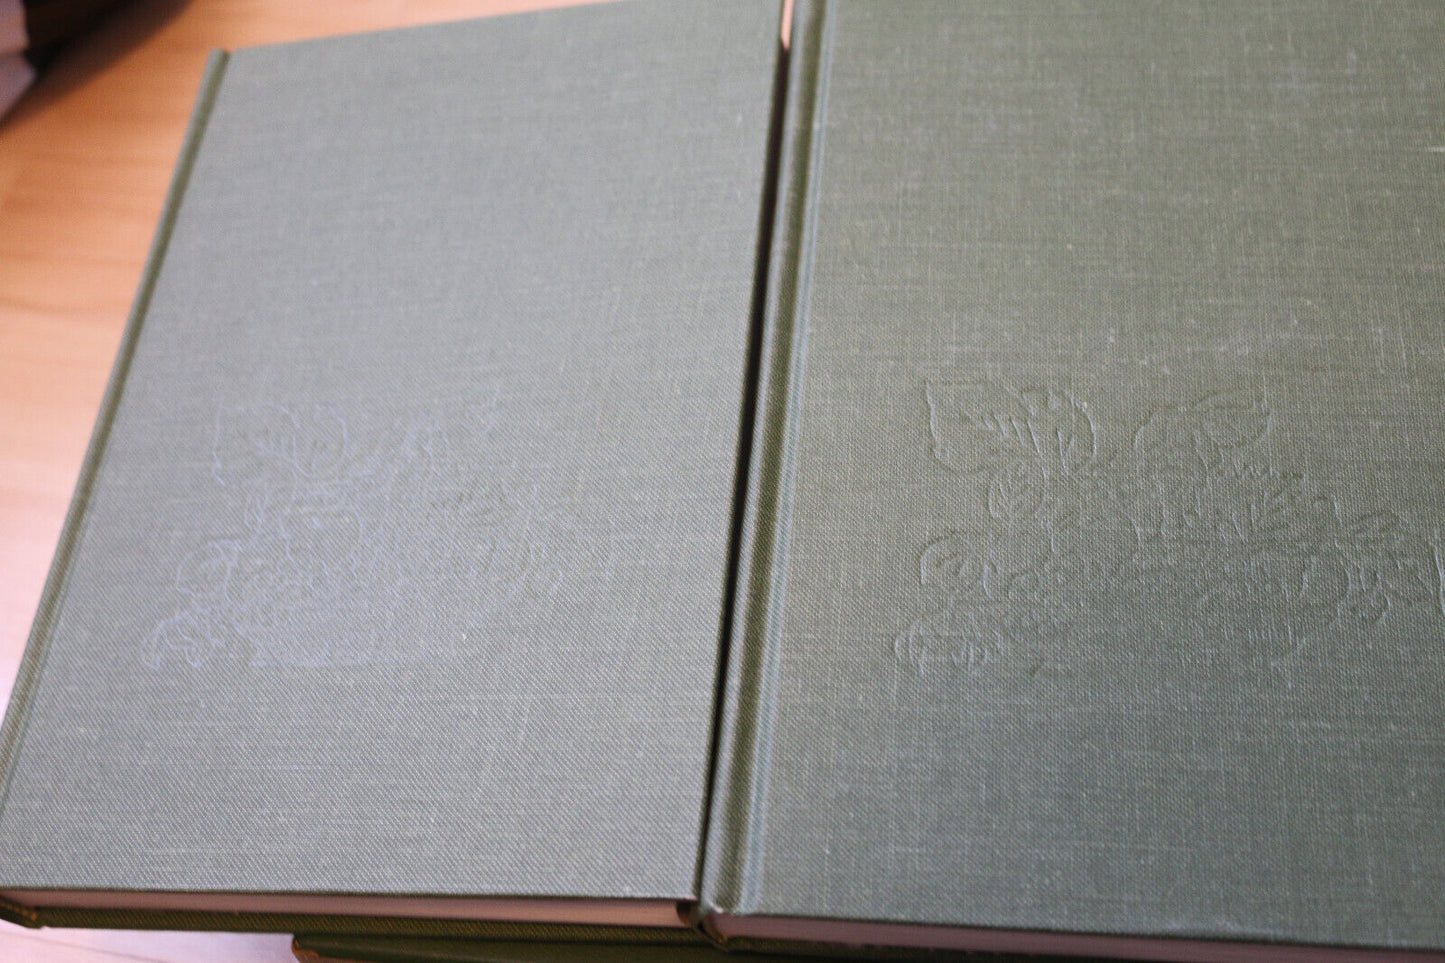 1968 The Horizon Cookbook 1St Edition ~ 2 Volumes Illustrated History Of Eating